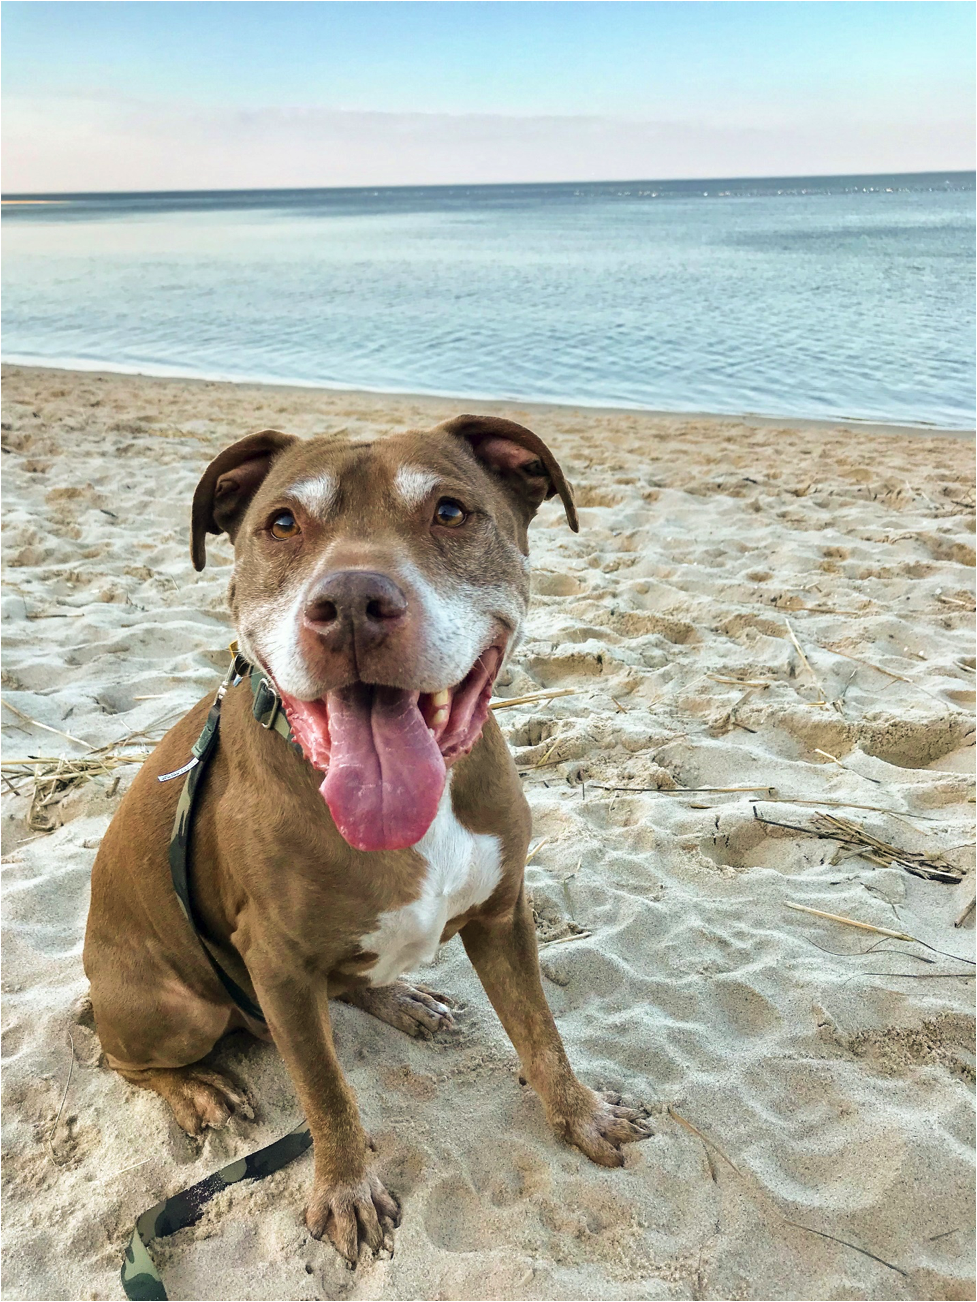 Brown and white pit bull with green leash and color sitting on the beach